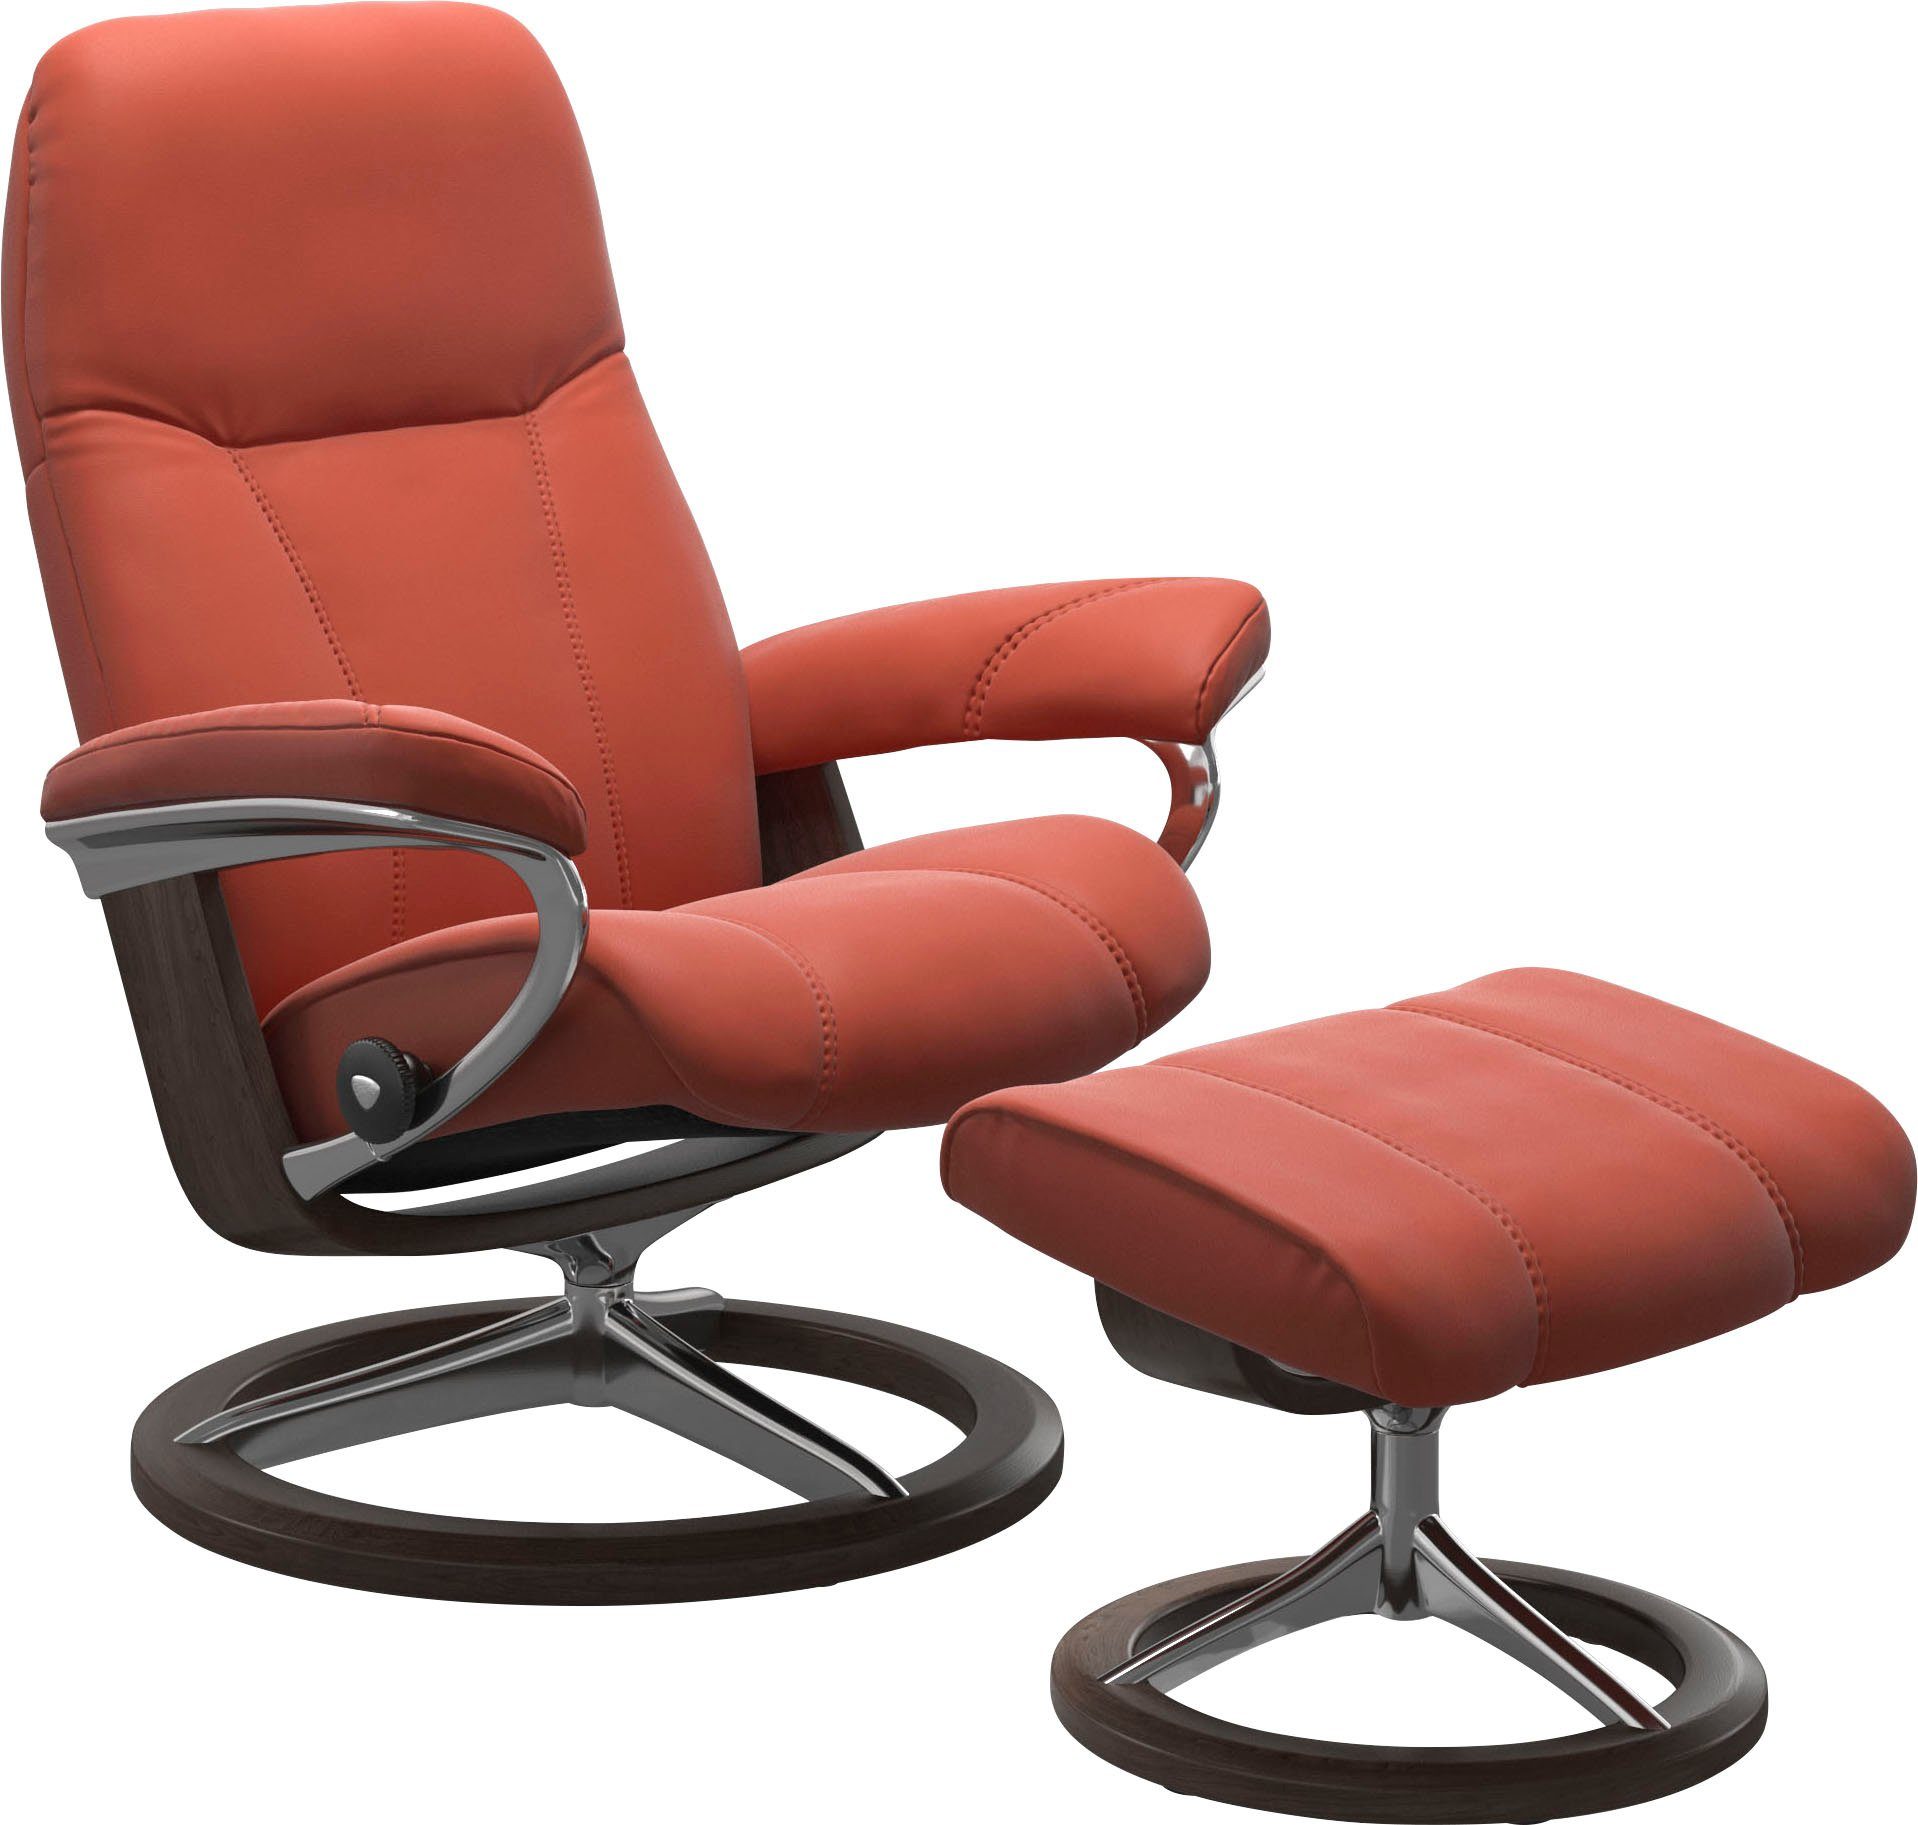 Stressless® S, Wenge Relaxsessel Signature Größe Base, Consul, Gestell mit